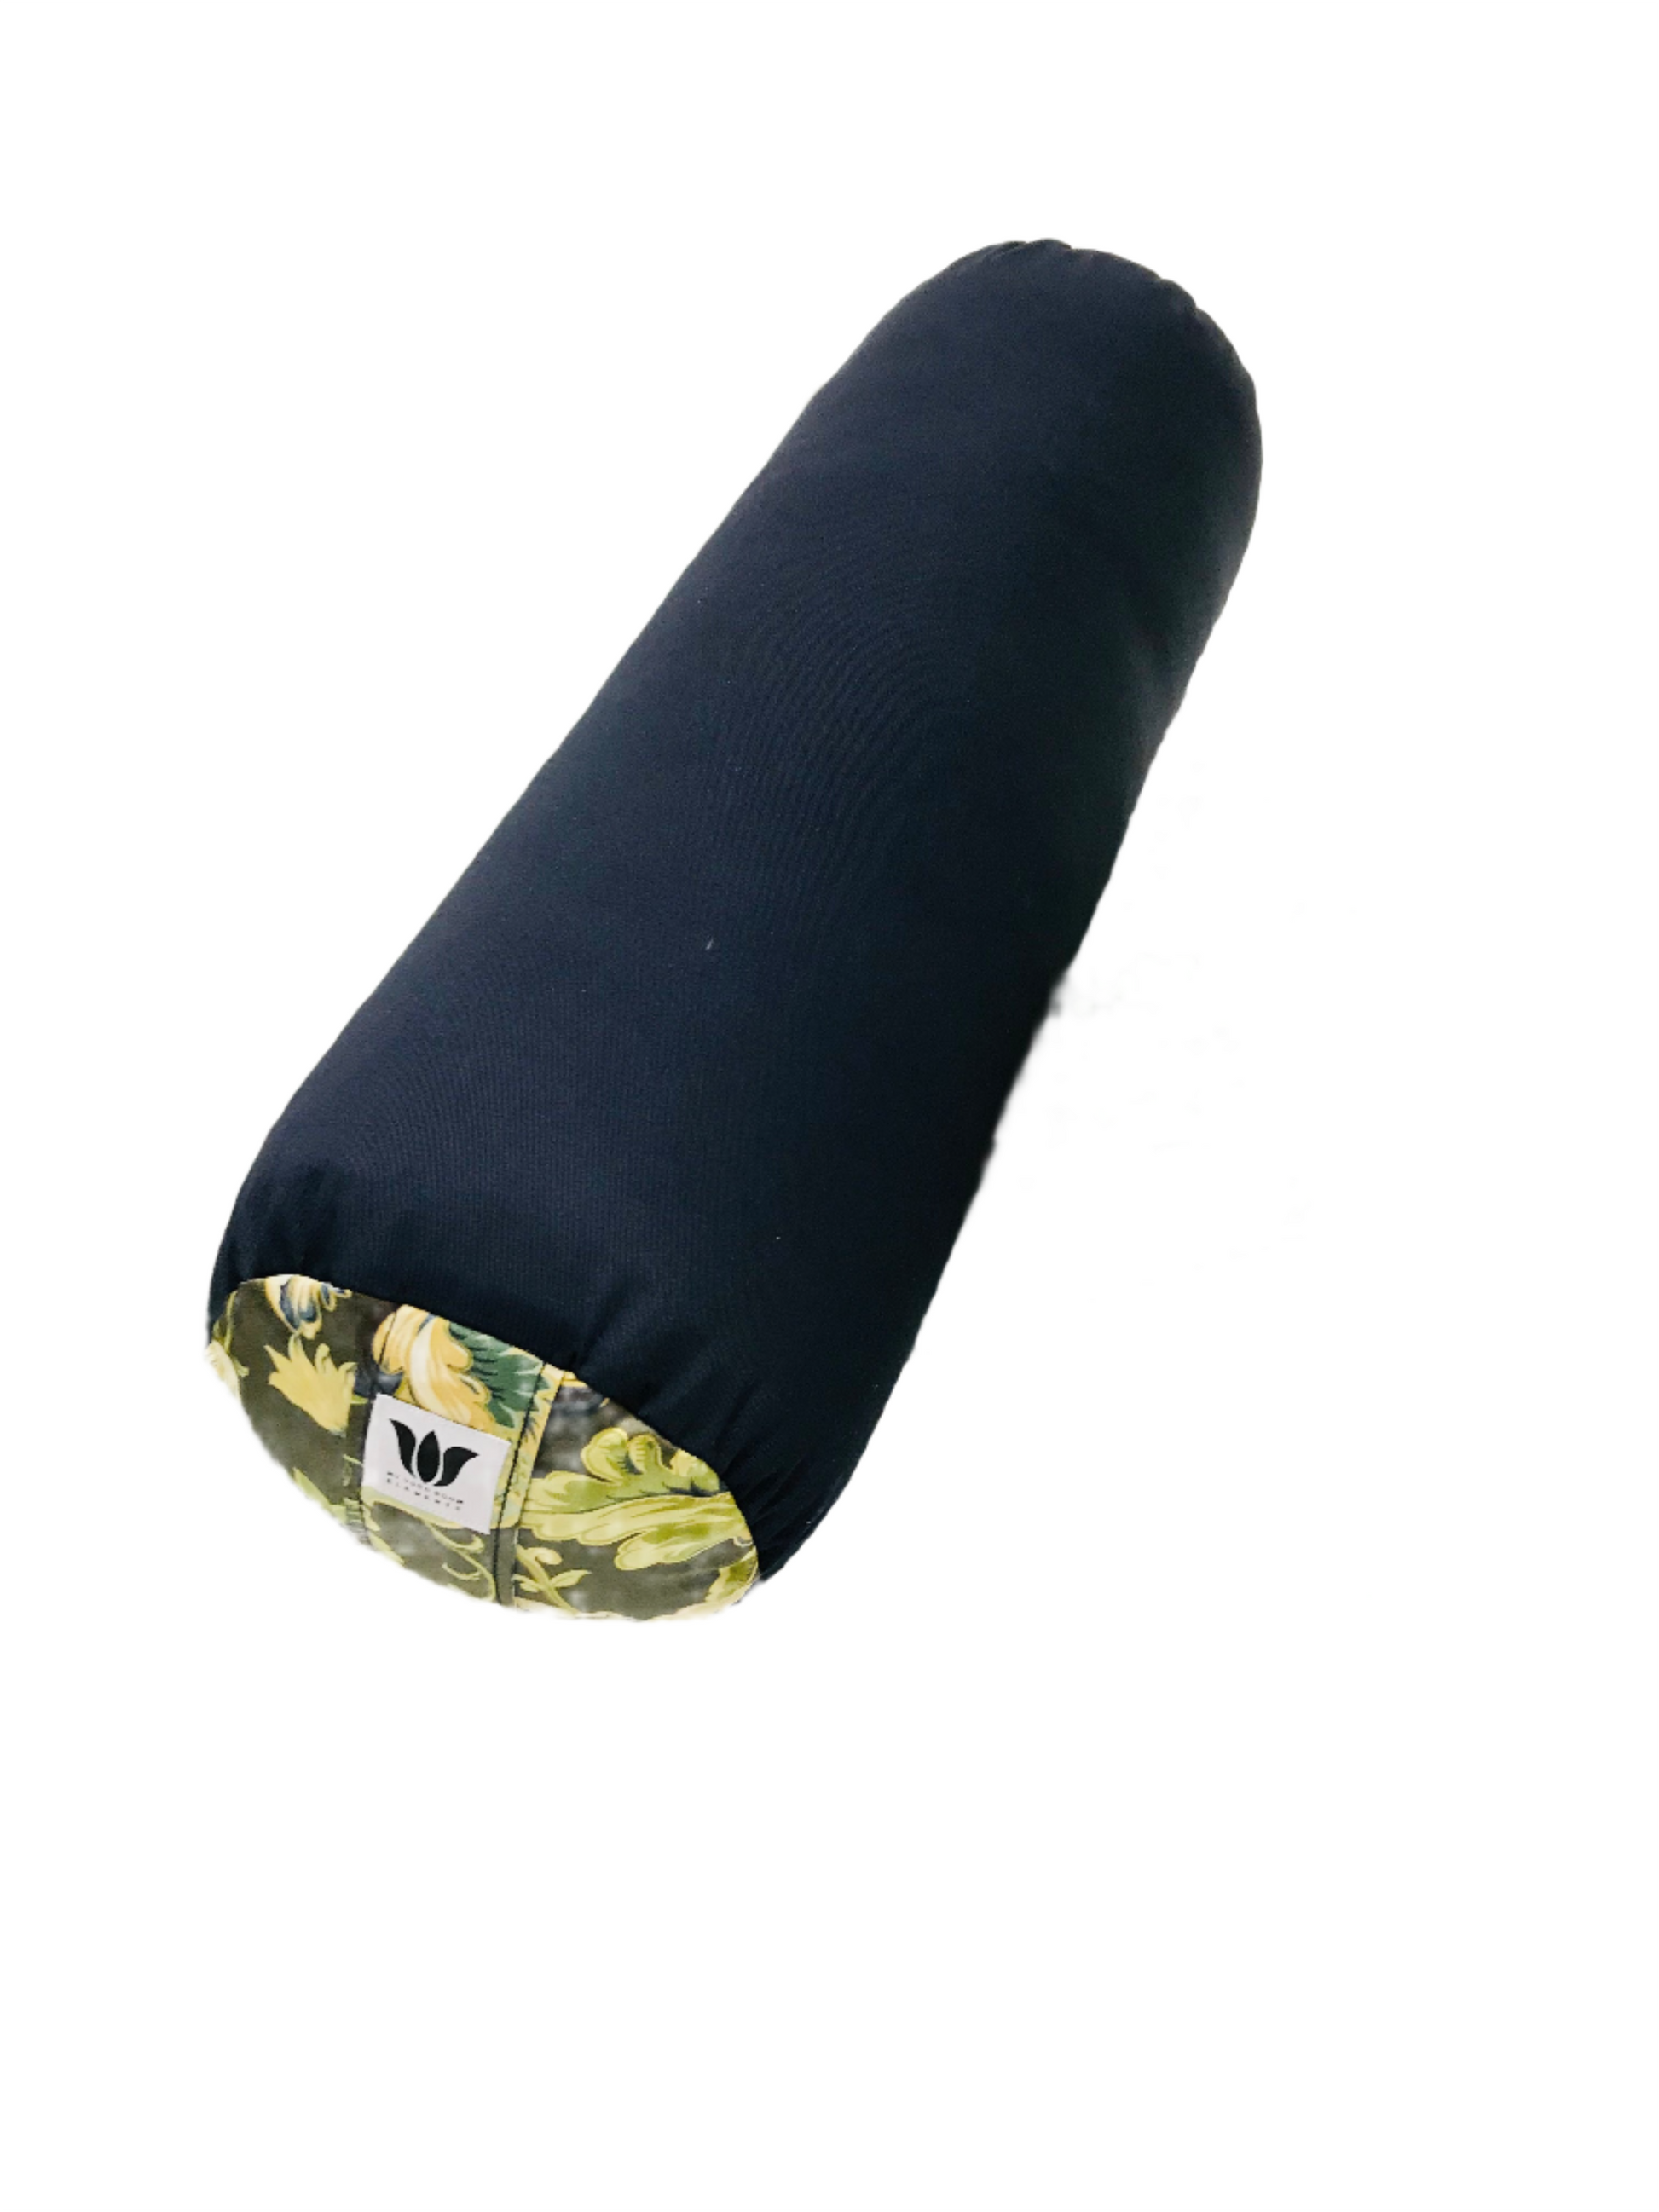 round yoga bolster navy with green floral accents made in calgary alberta canada